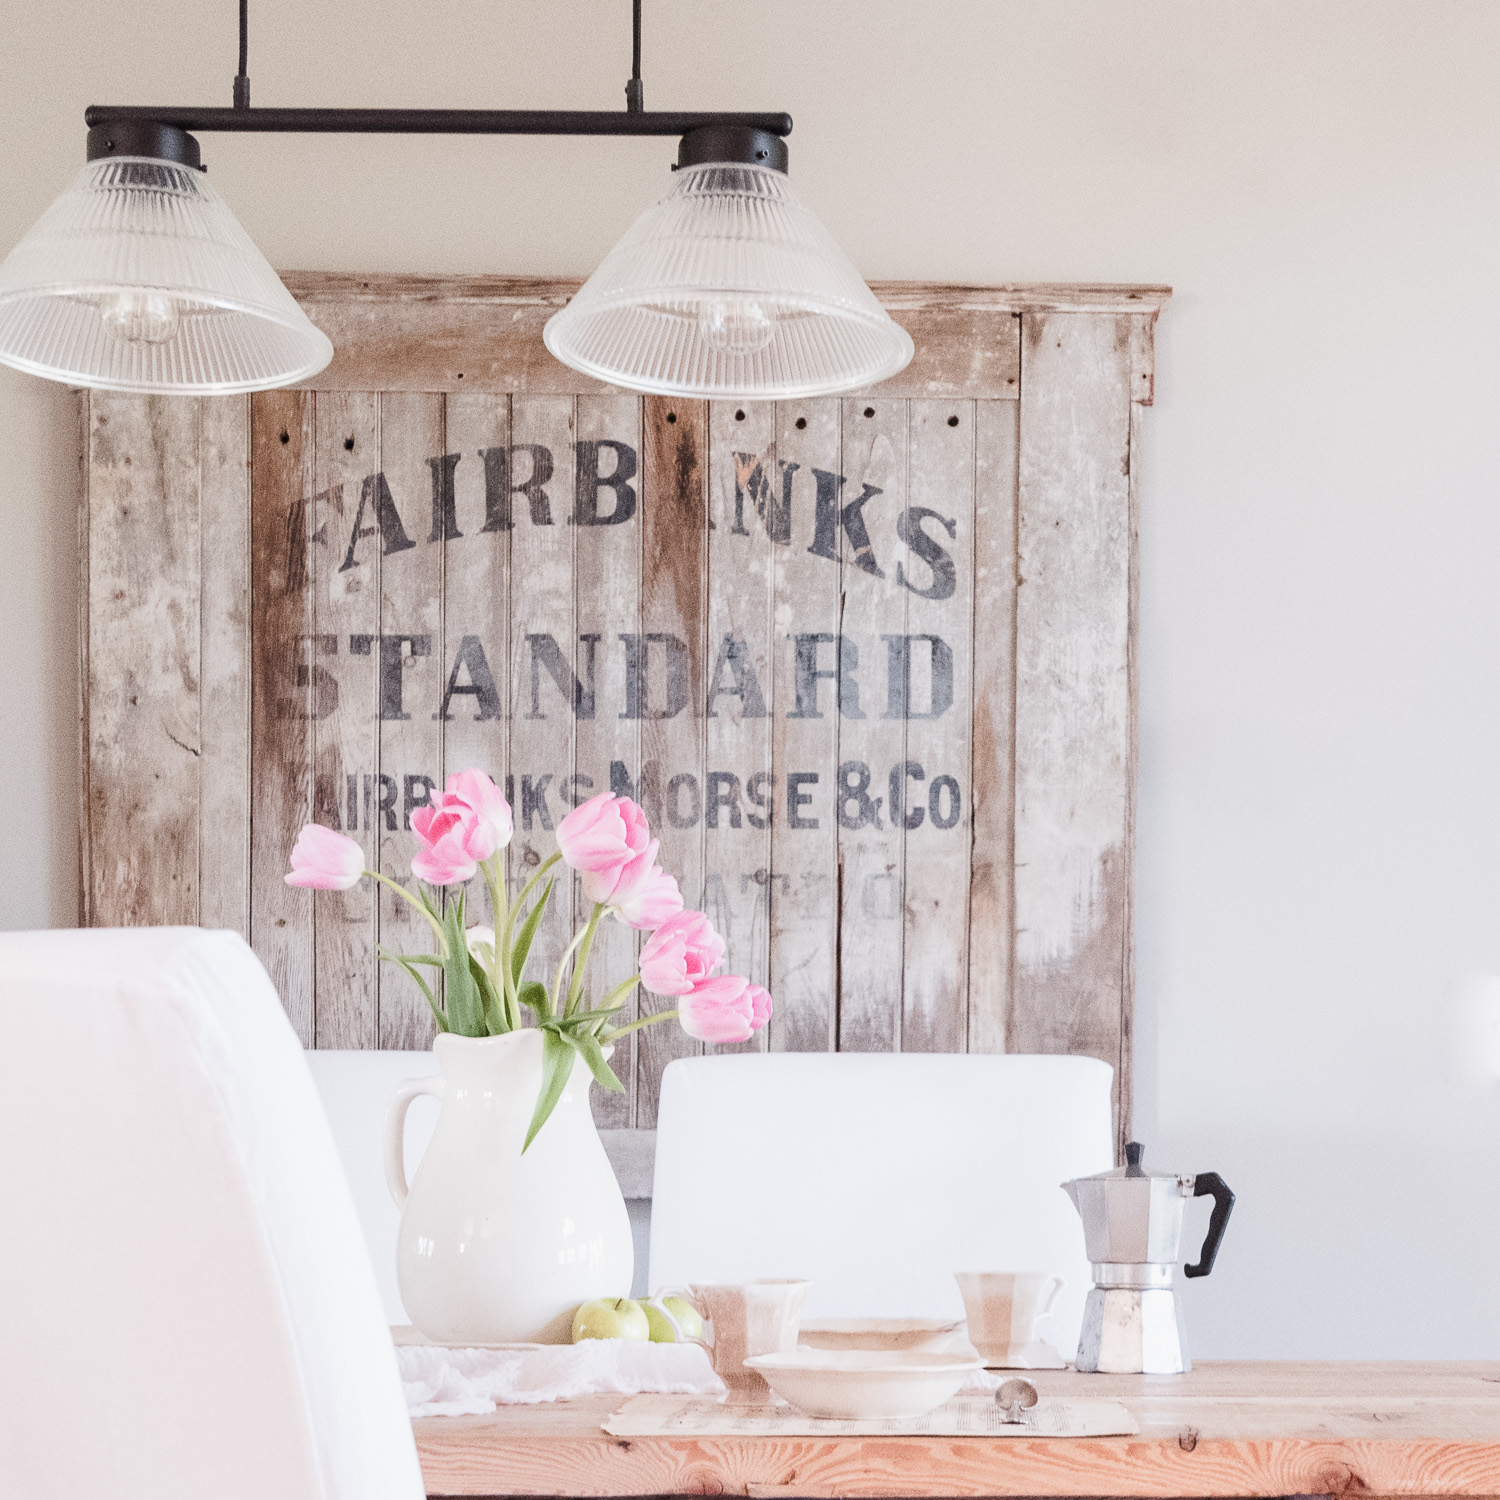 Our Modern Farmhouse decorated with vintage signs